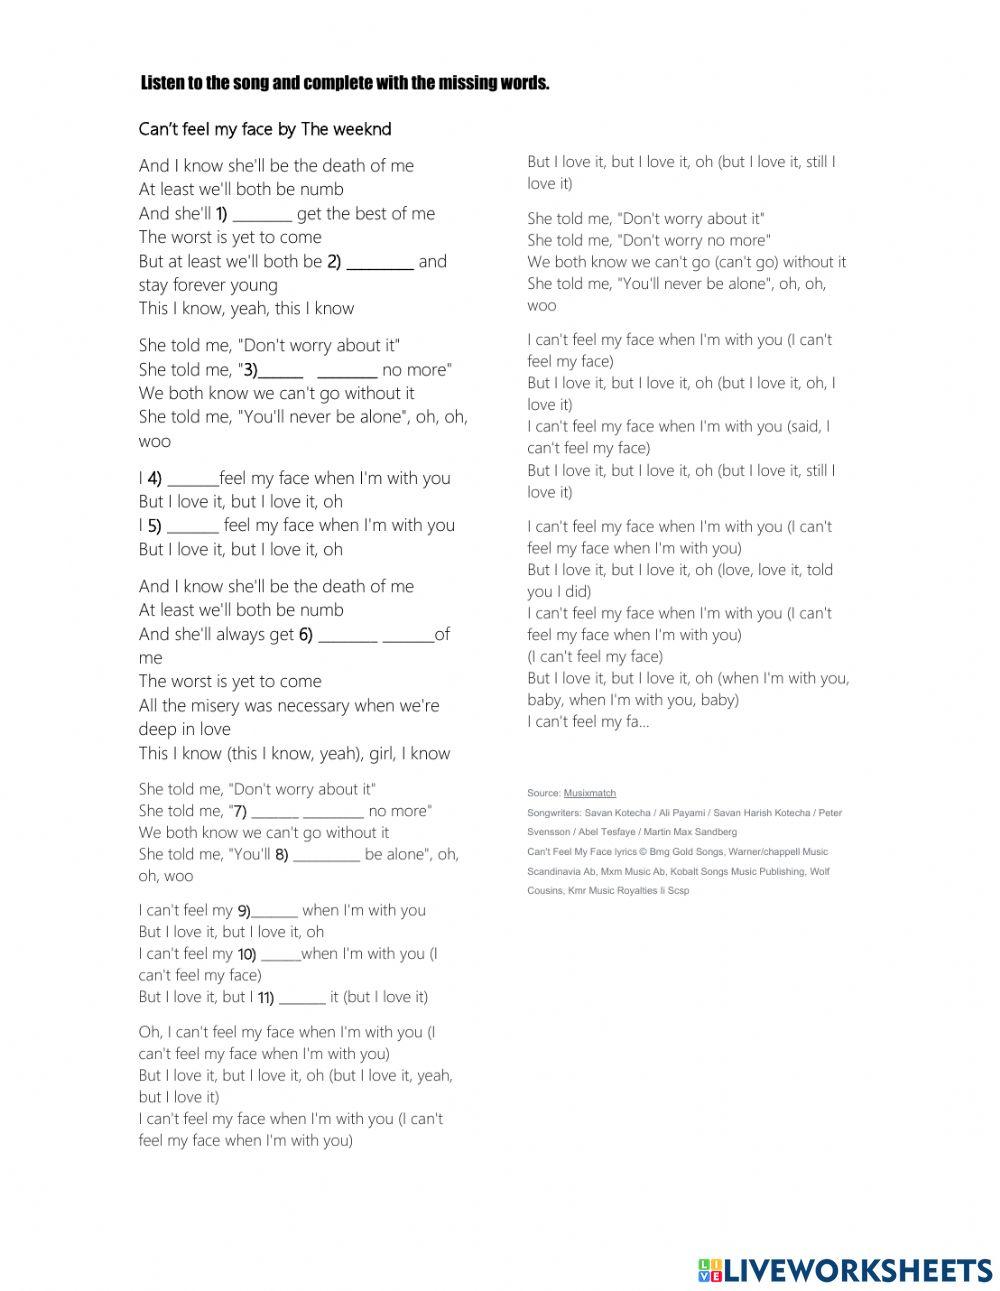 Can't feel my face (The Weeknd) worksheet | Live Worksheets